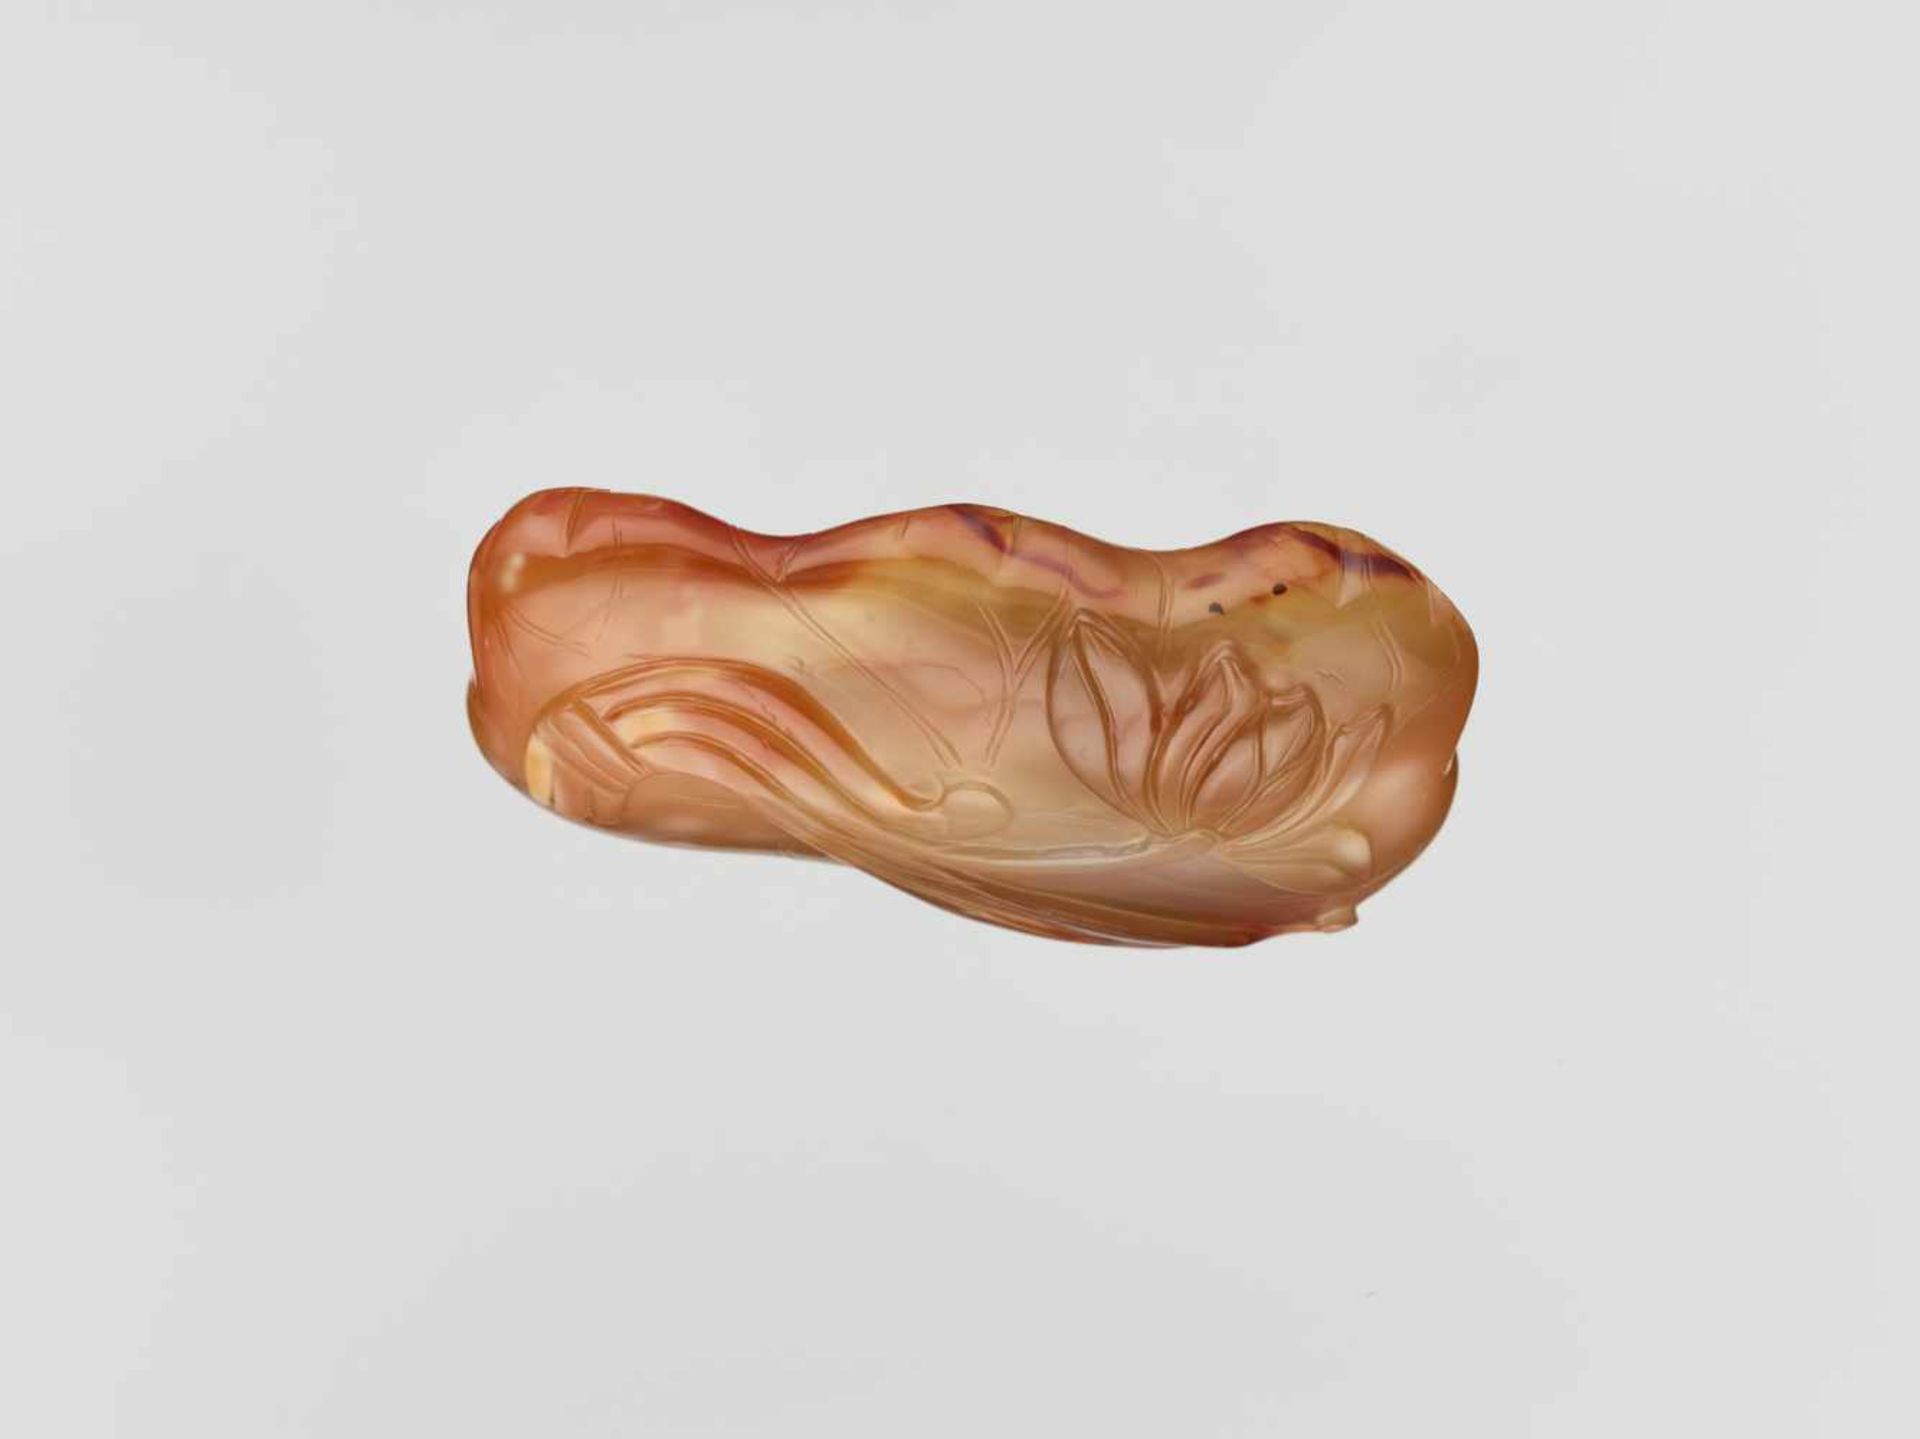 A CARVED AGATE ‘LOTUS’ WASHER QING DYNASTY, 18TH CENTURY Translucent agate of golden-brown and amber - Image 6 of 6